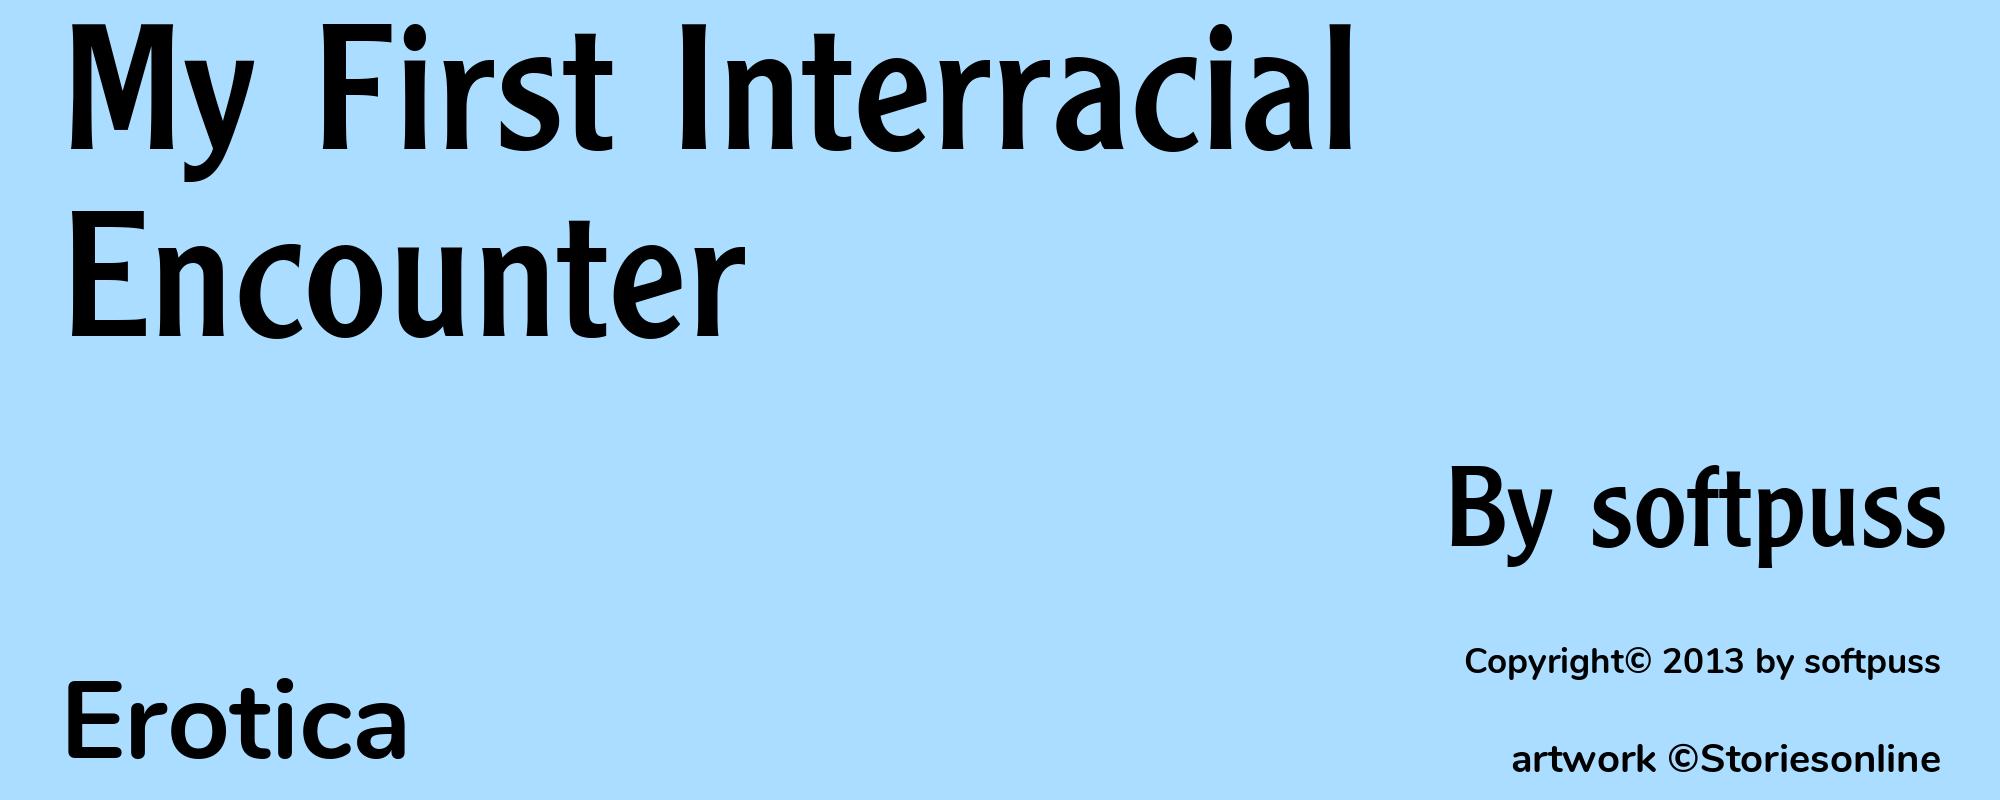 My First Interracial Encounter - Cover